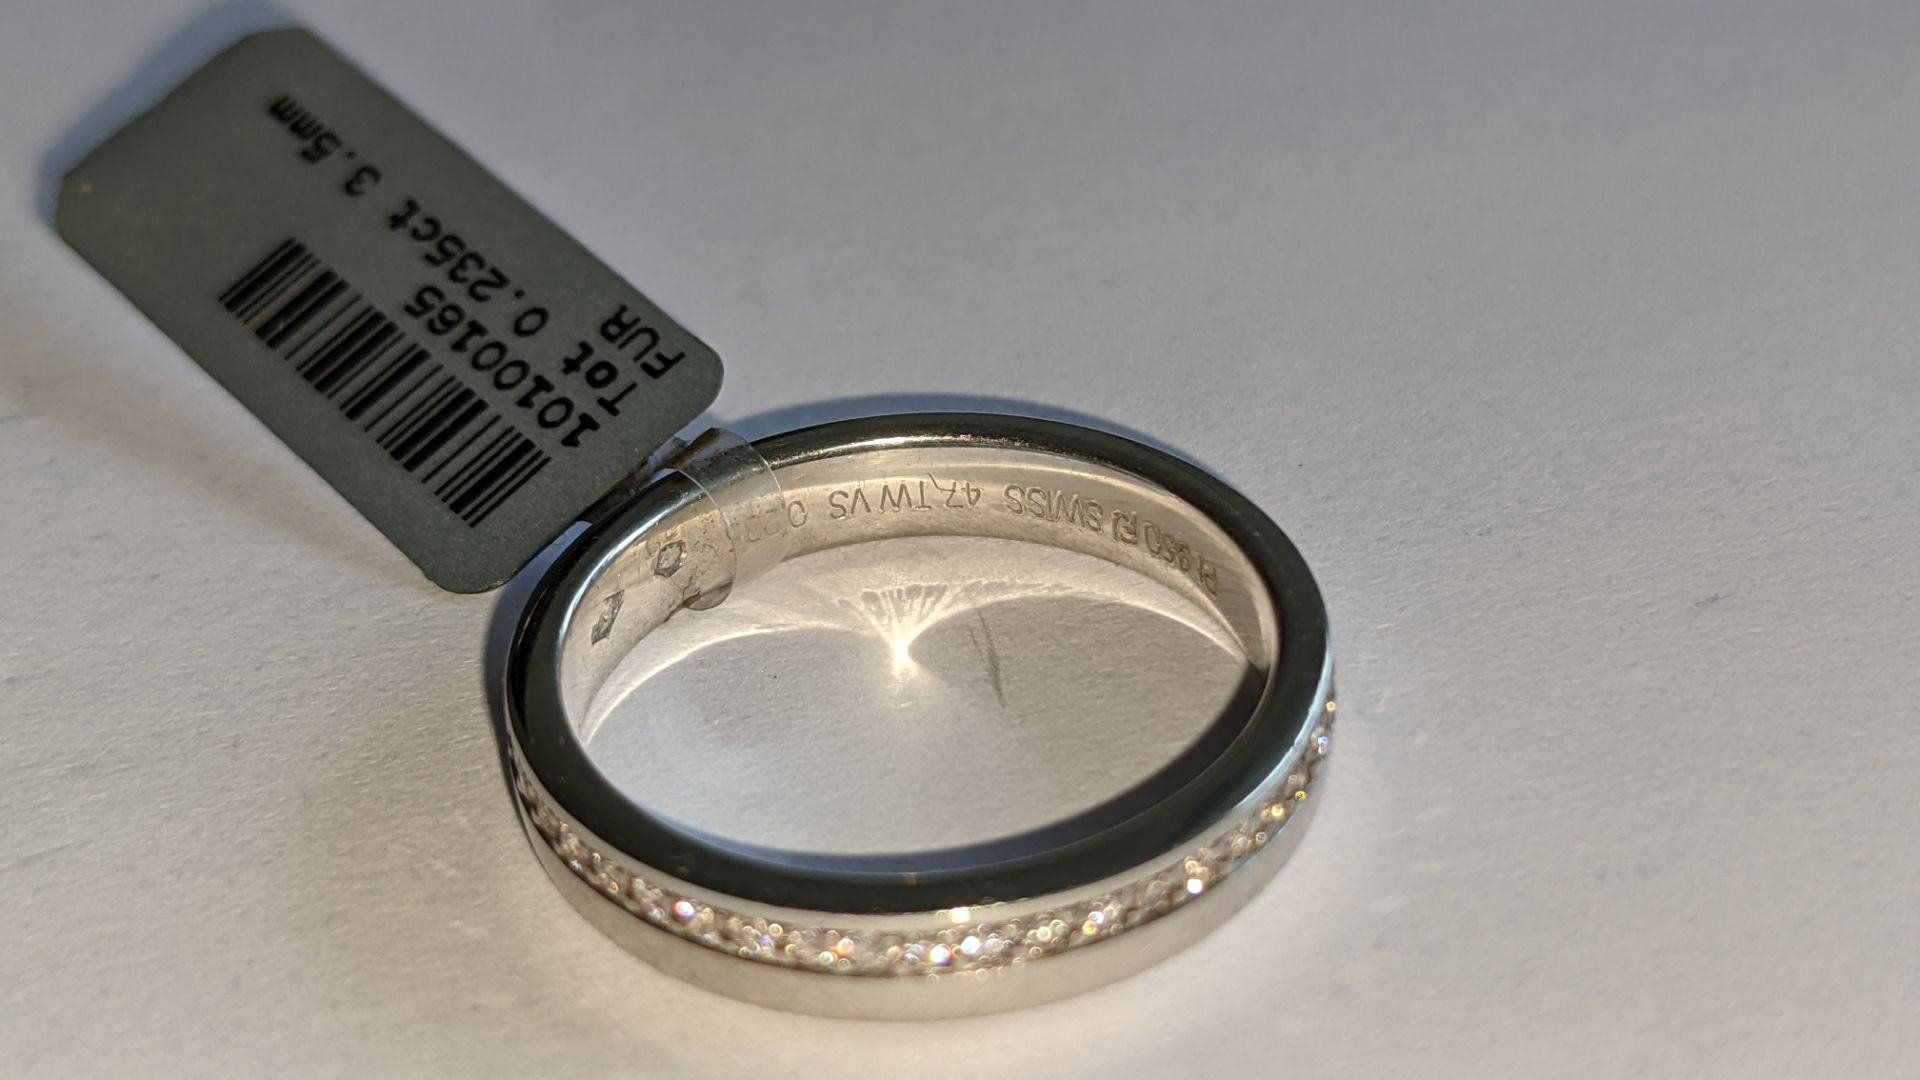 Platinum 950 ring with diamonds weighing total of 0.235ct. Ring 3.5mm wide. Diamonds surround the en - Image 9 of 15